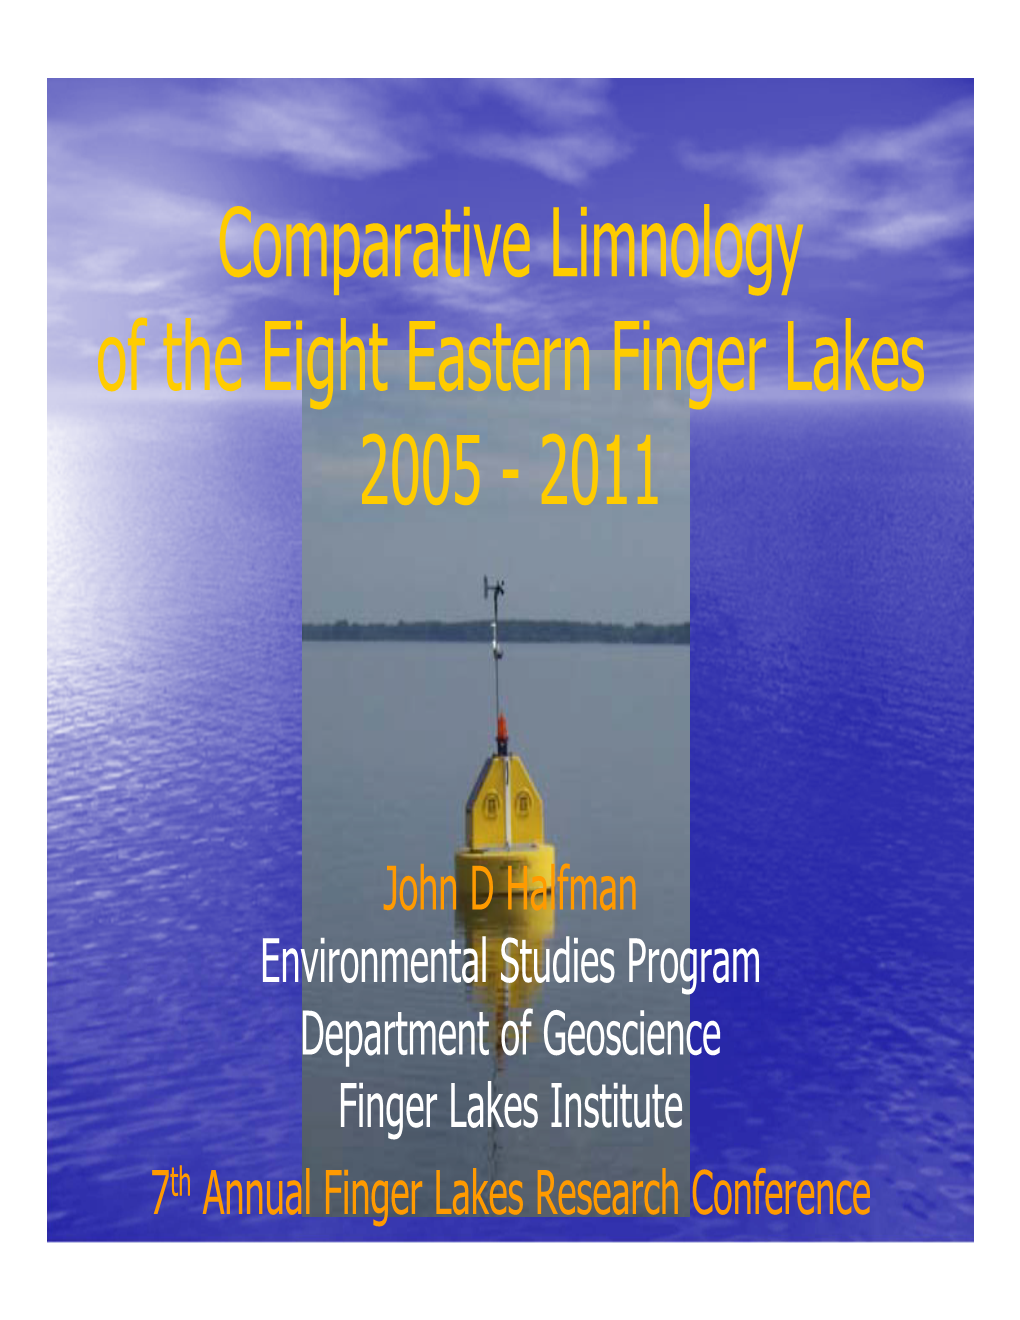 Comparative Limnology of the Eight Eastern Finger Lakes 2005 - 2011